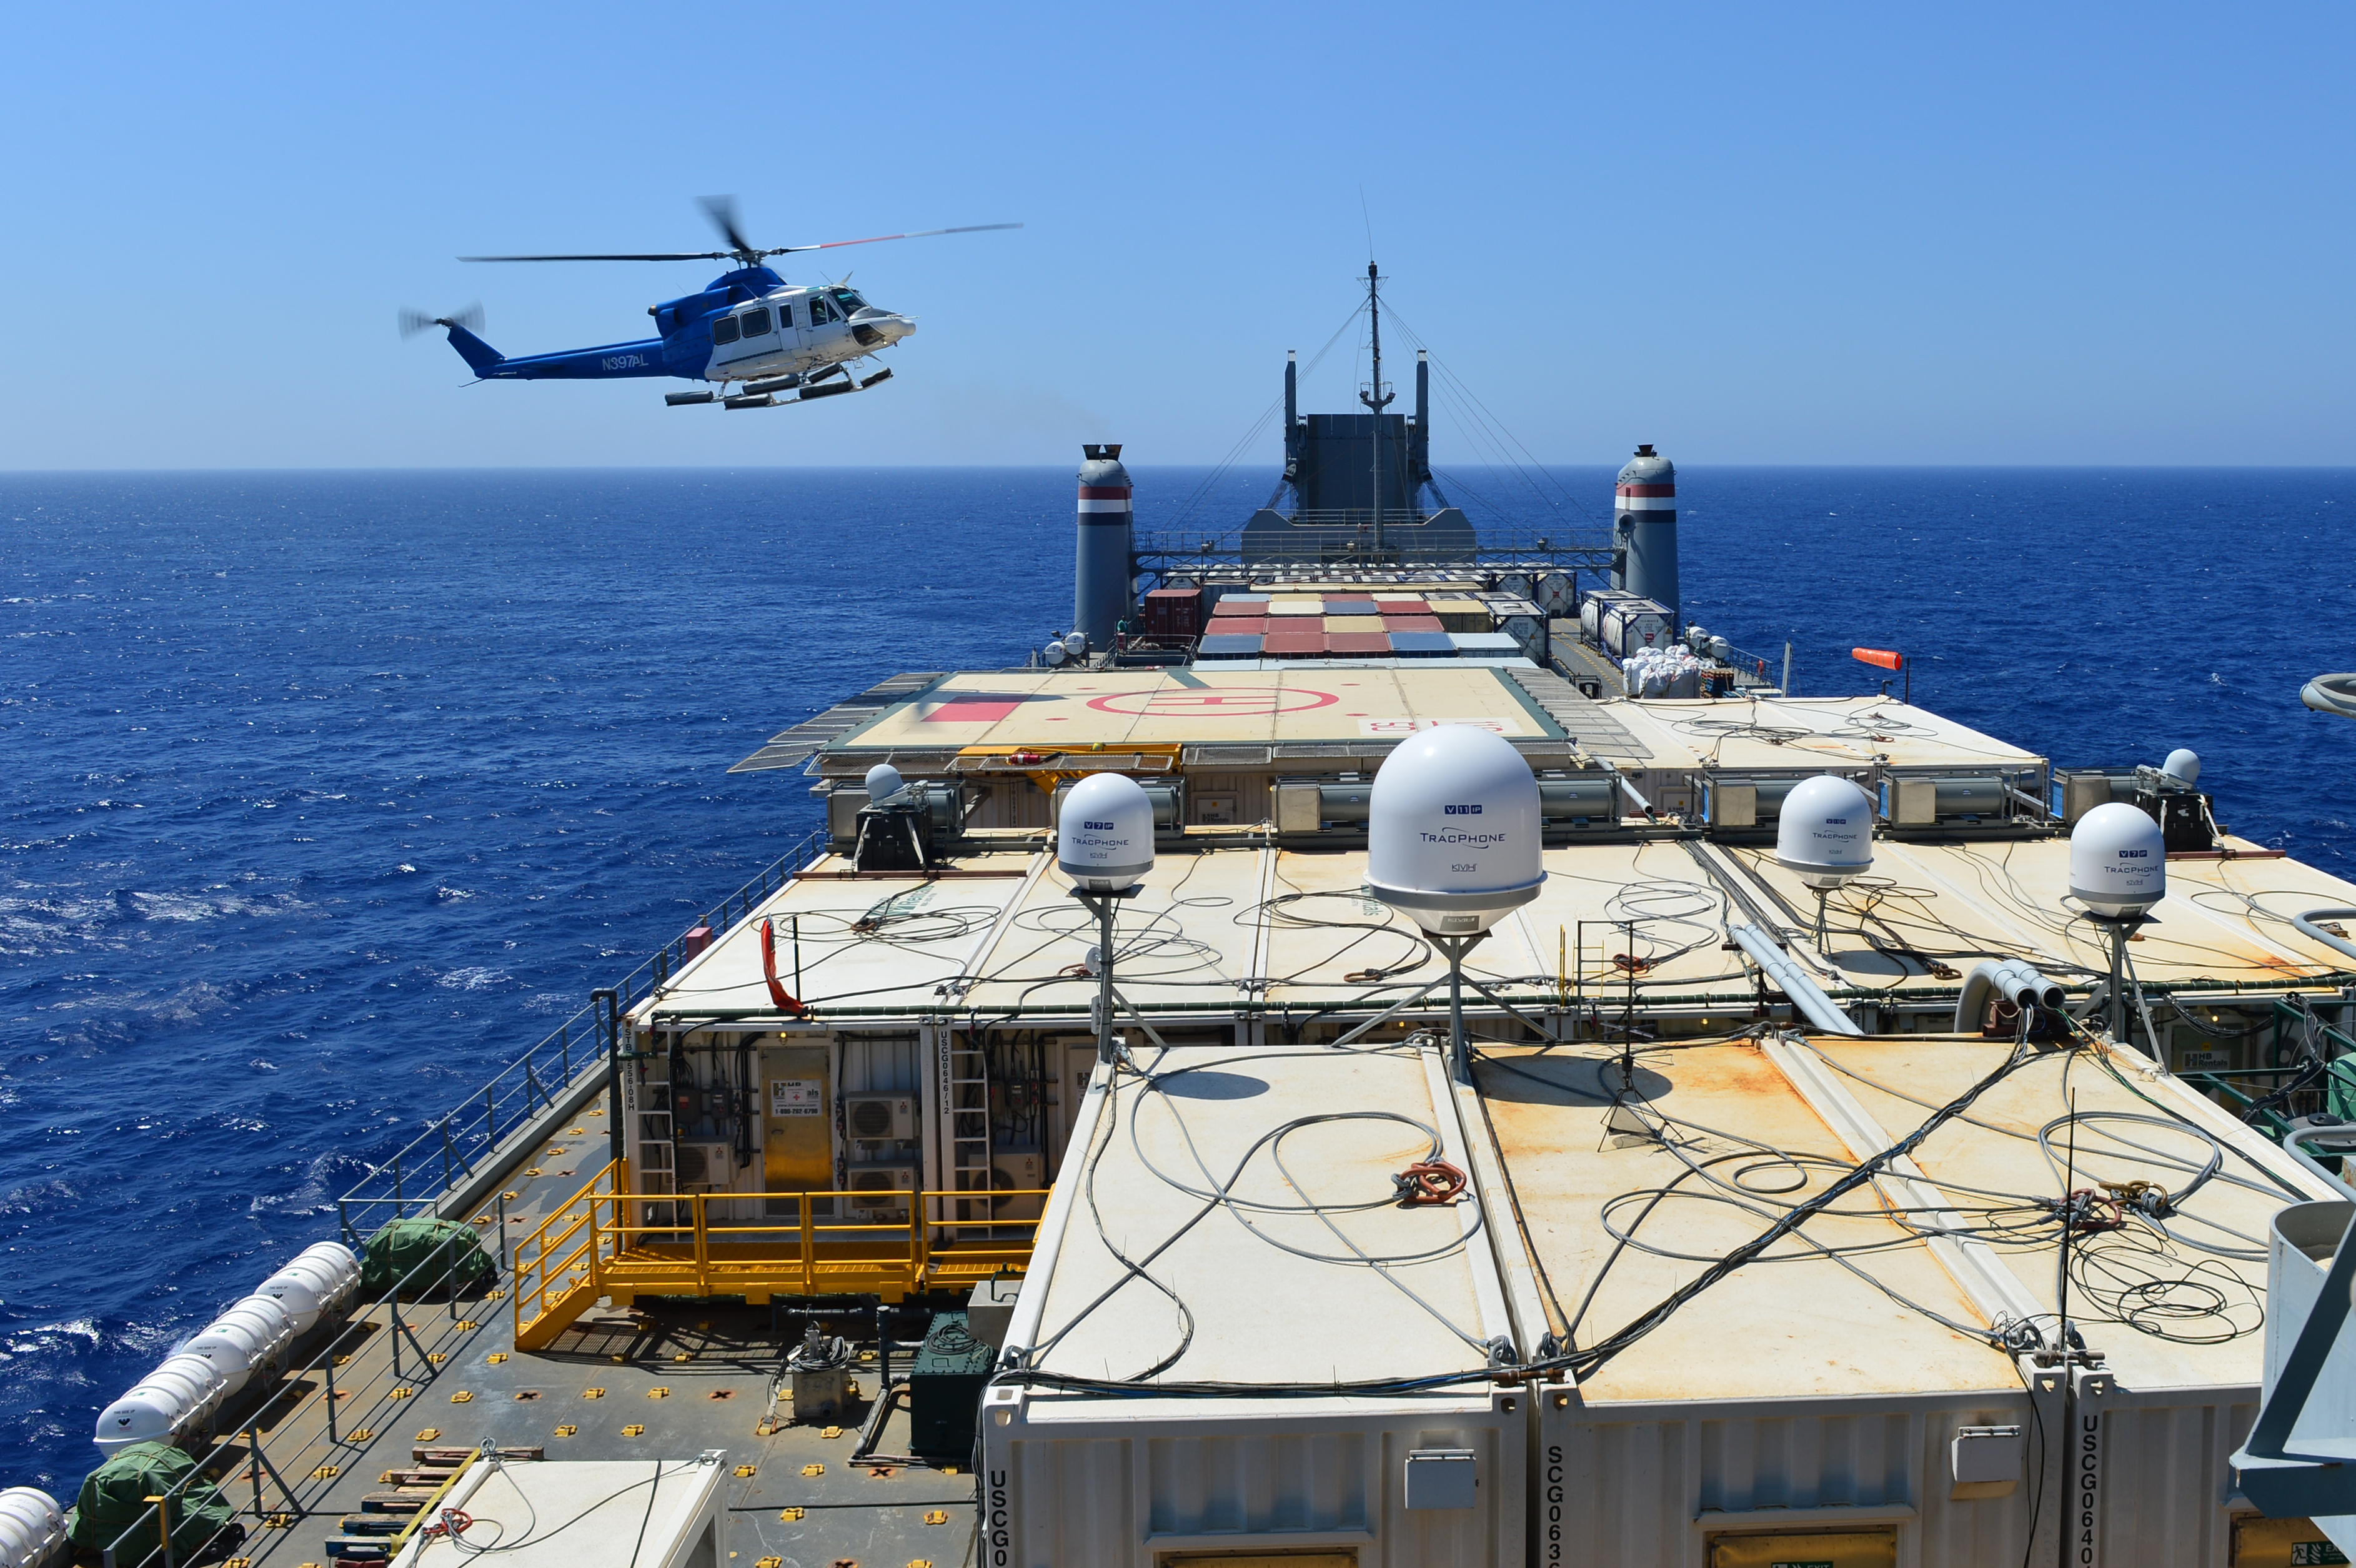 A helicopter approaches the container ship MV Cape Ray (T-AKR 9679) in the Mediterranean Sea to drop off cargo Aug. 4, 2014. US Navy Photo